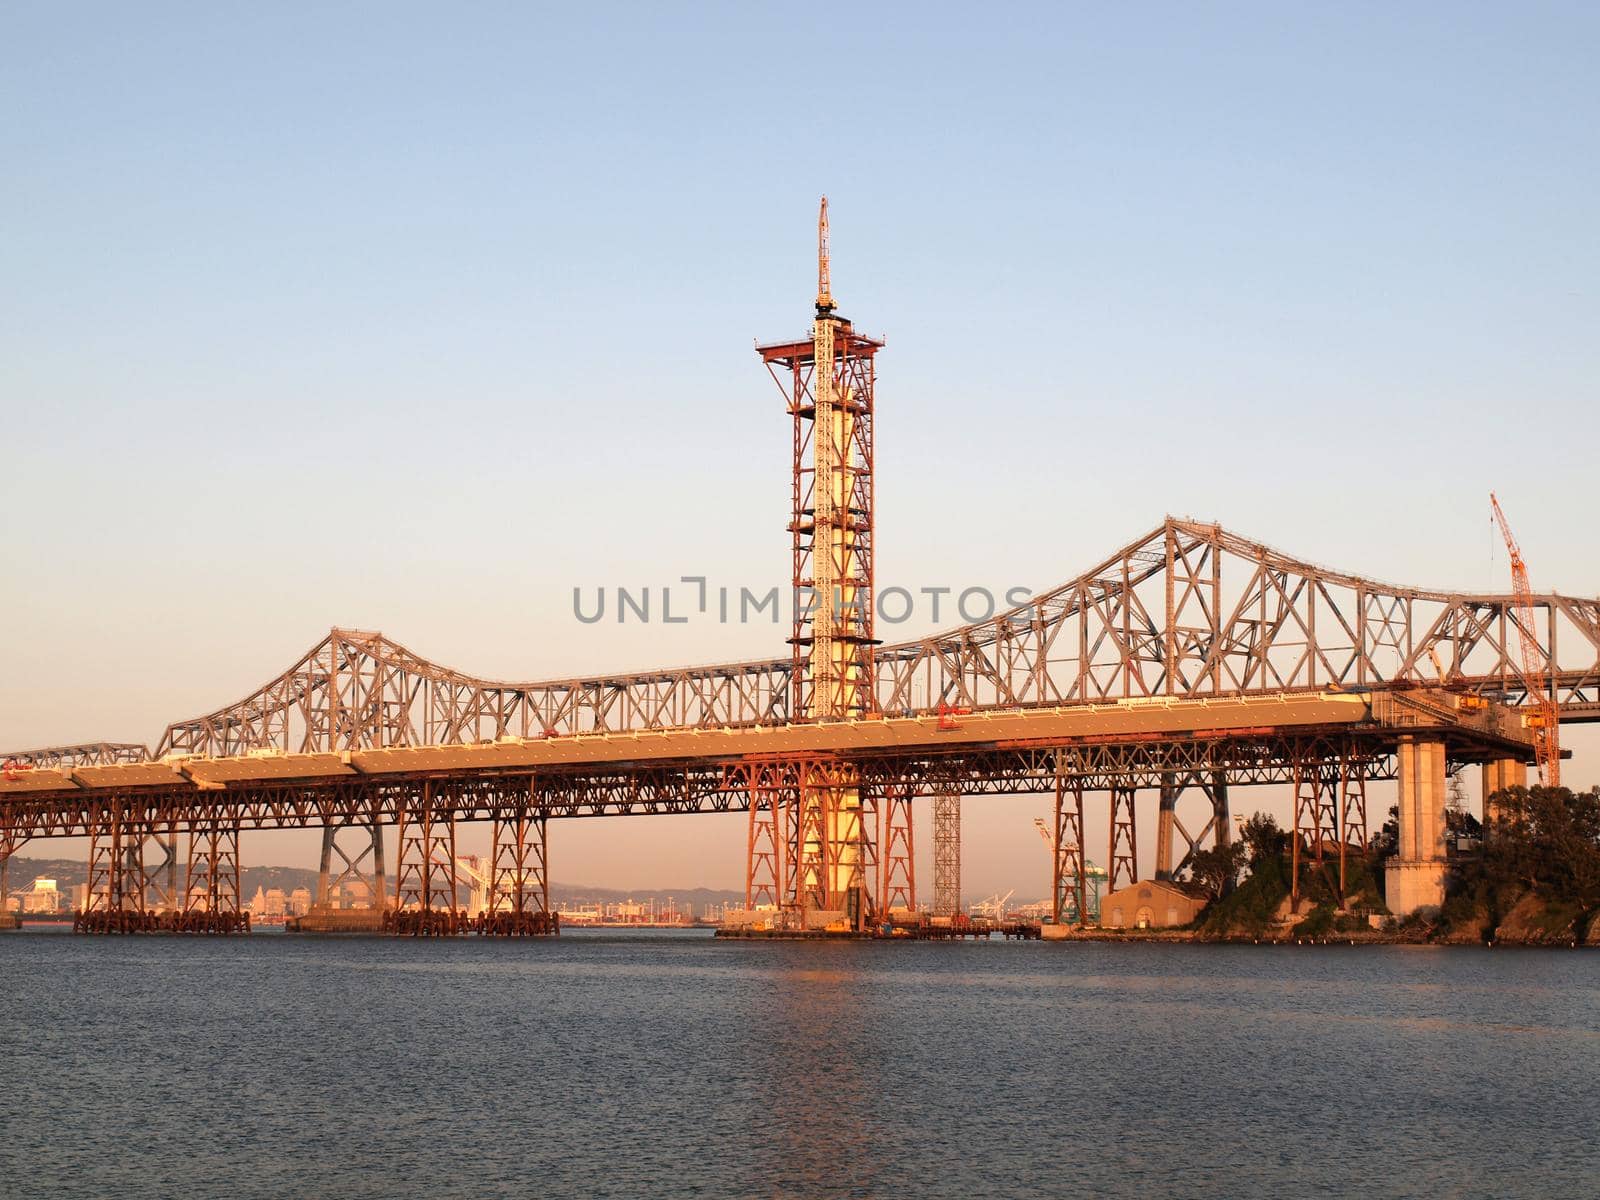 Half finished new Bay Bridge tower at dusk by EricGBVD